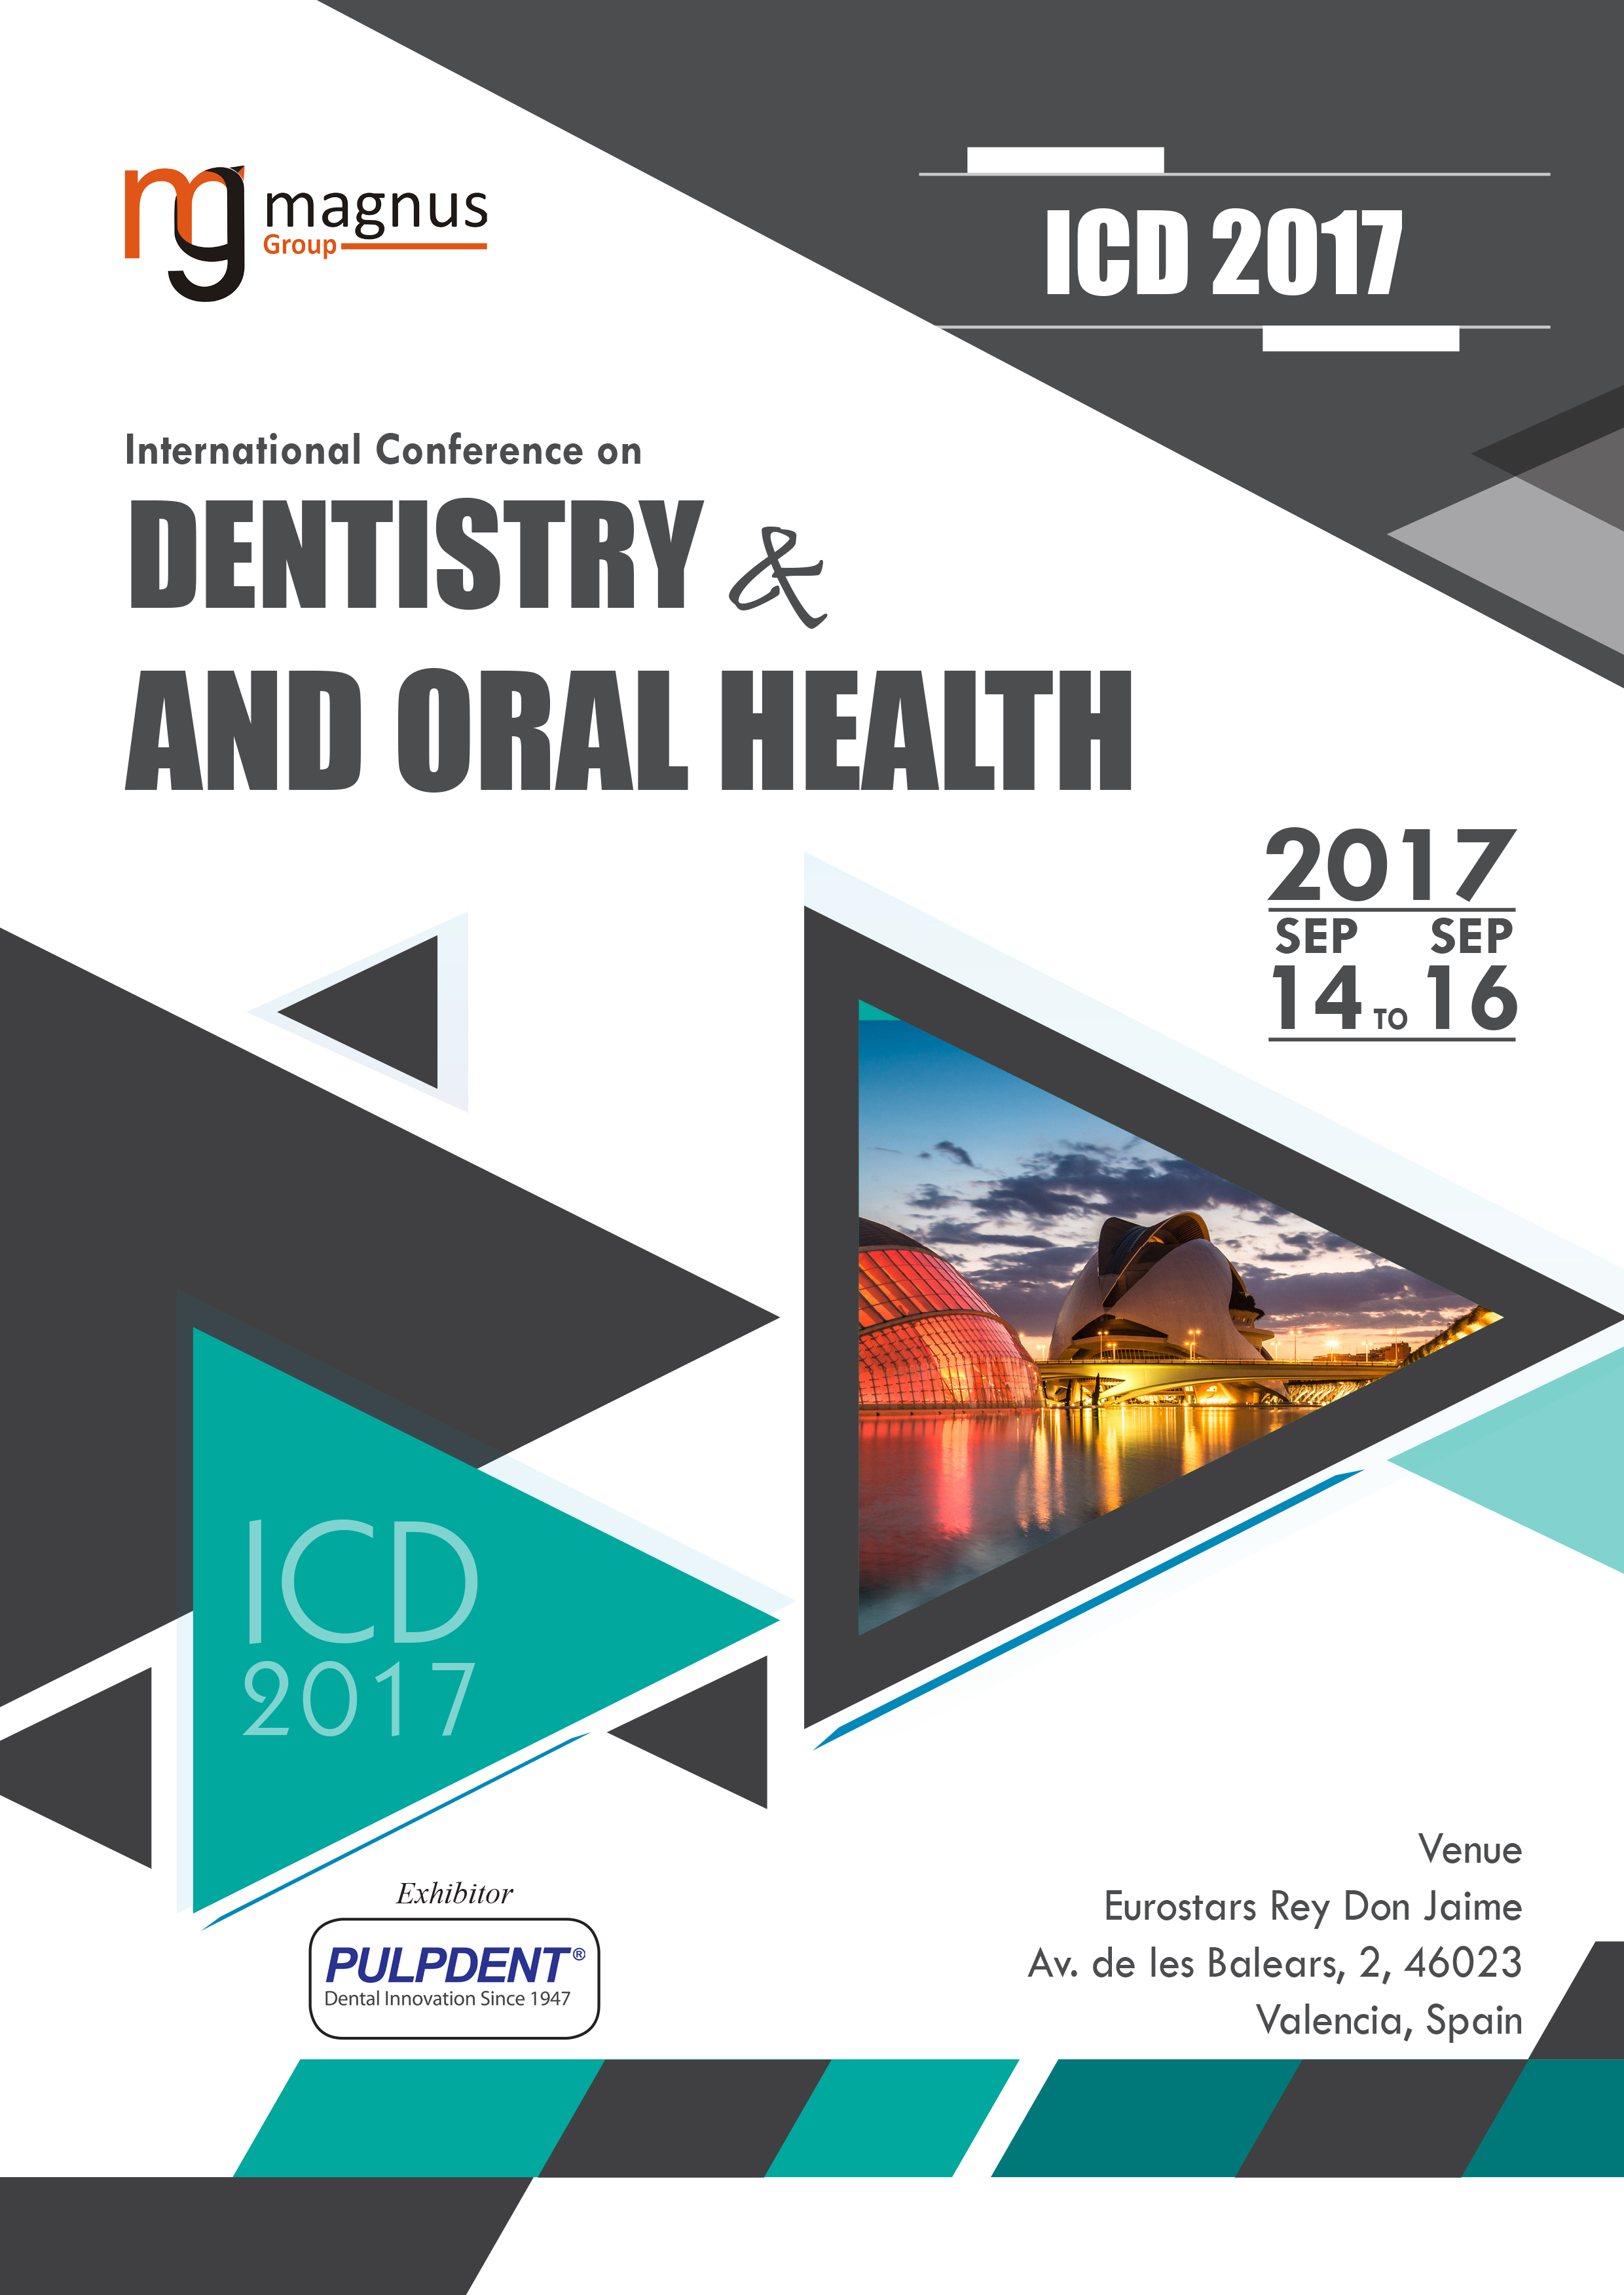 International Conference on Dentistry and Oral Health  | Valencia, Spain Event Book